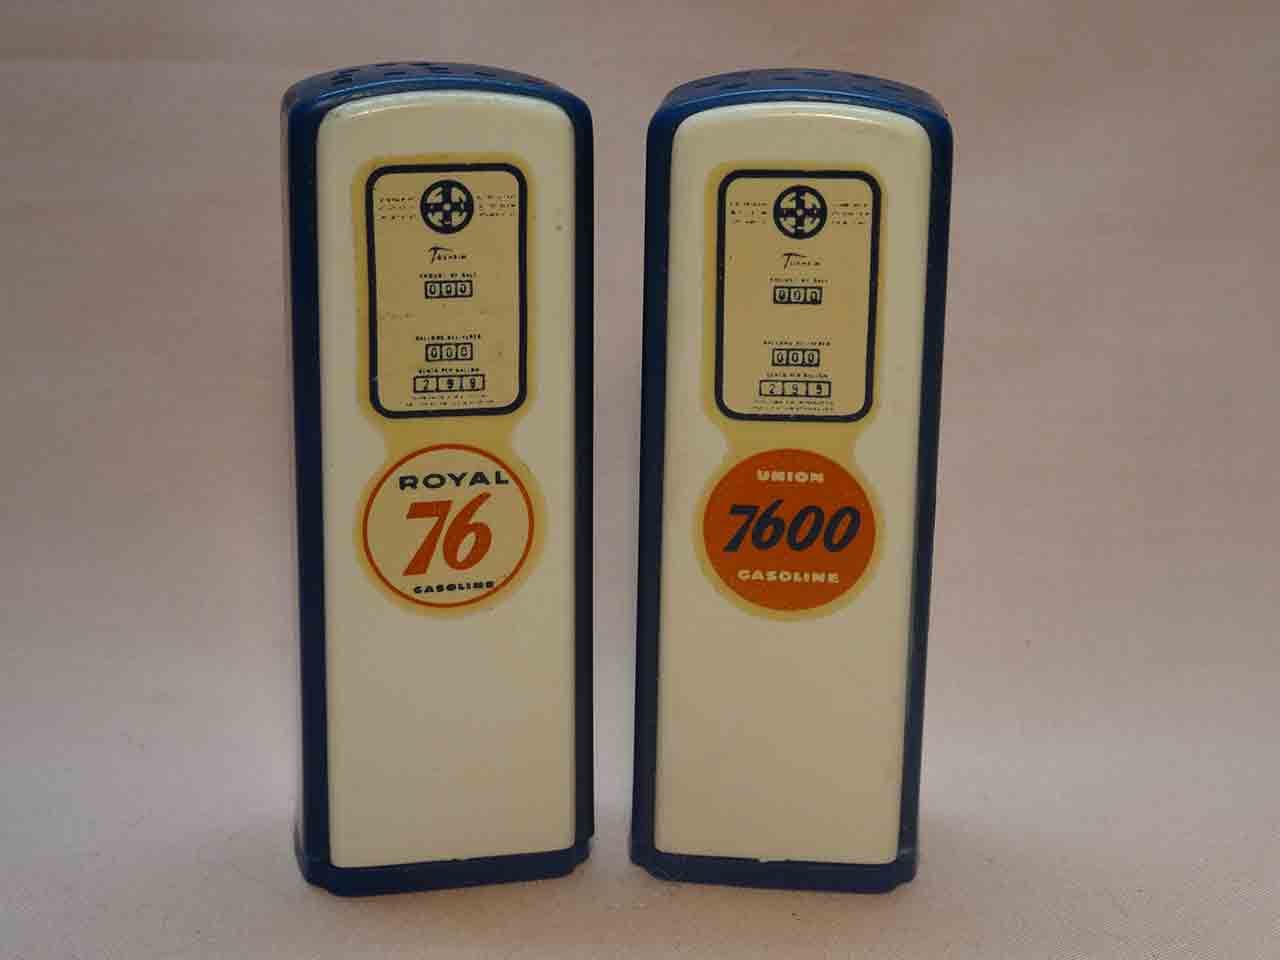 Plastic advertising gas pumps salt and pepper shakers - Union 76